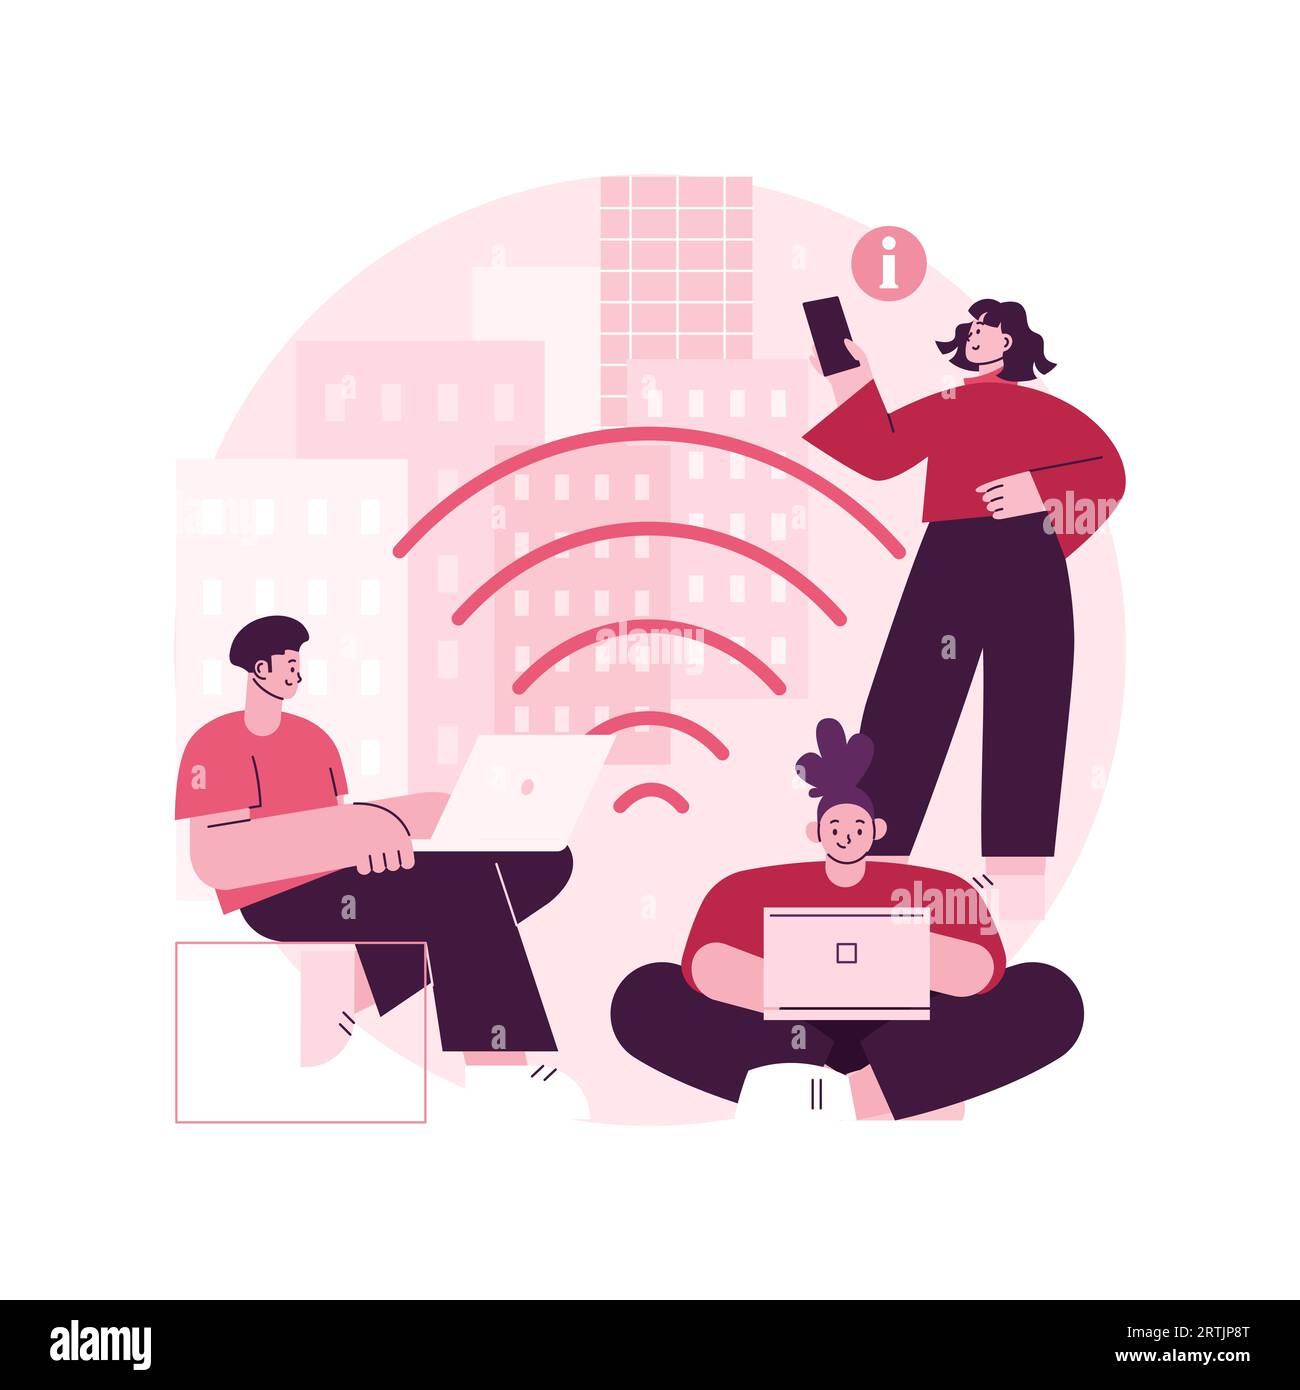 Public wi-fi hotspot abstract concept vector illustration. City center Wi-Fi, hotspot map, free wireless access, public open internet, network service, find connection spot abstract metaphor. Stock Vector